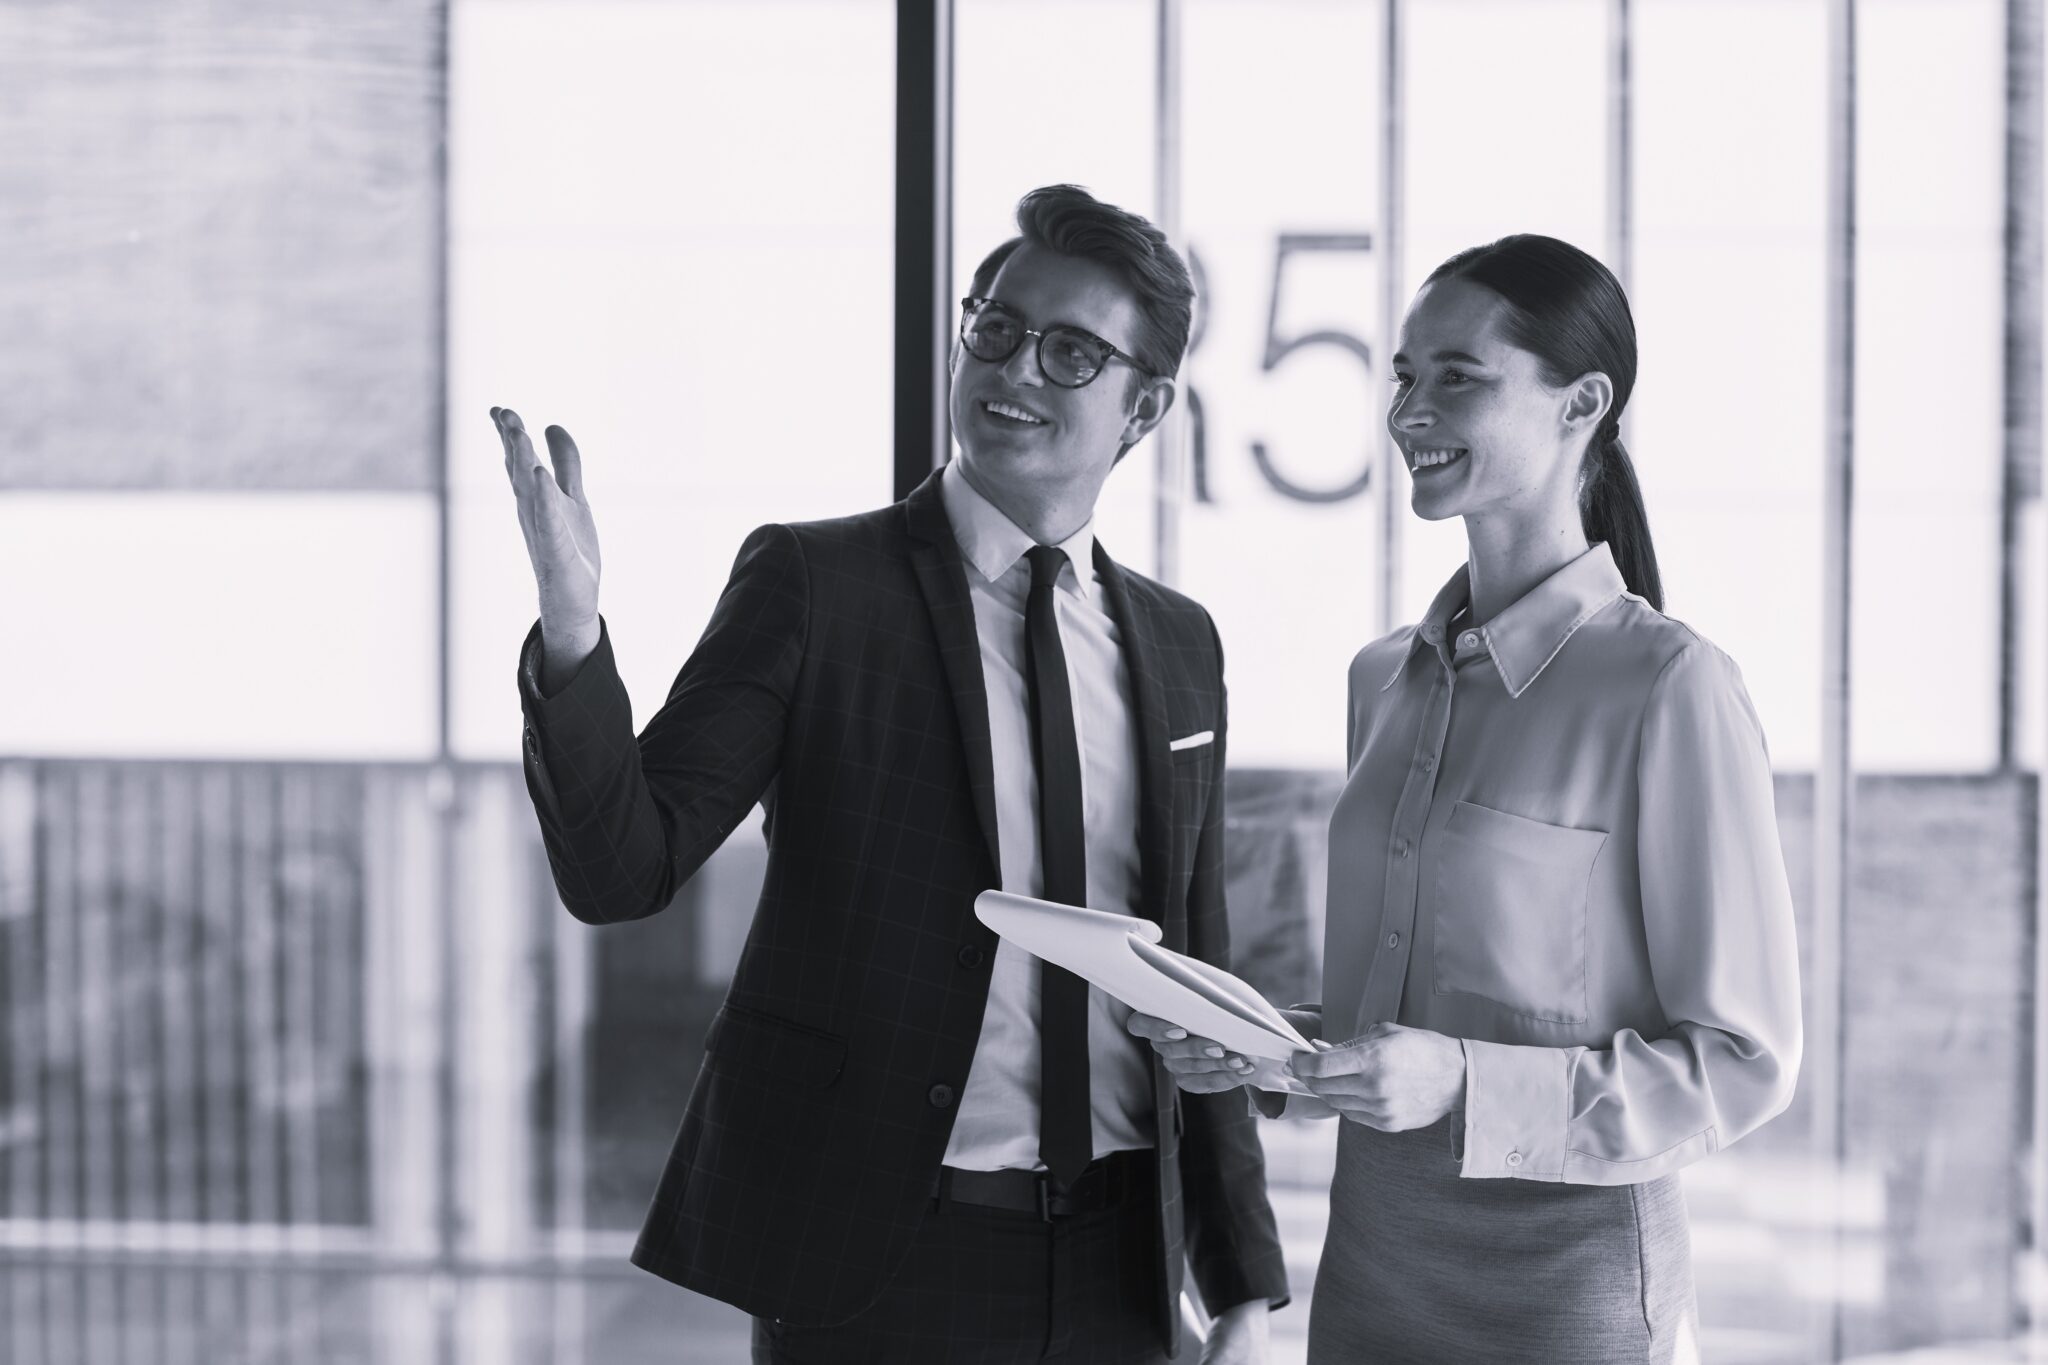 Waist up portrait of smiling real estate agent discussing property with female client and pointing up while standing in empty office building interior lit by sunlight, copy space